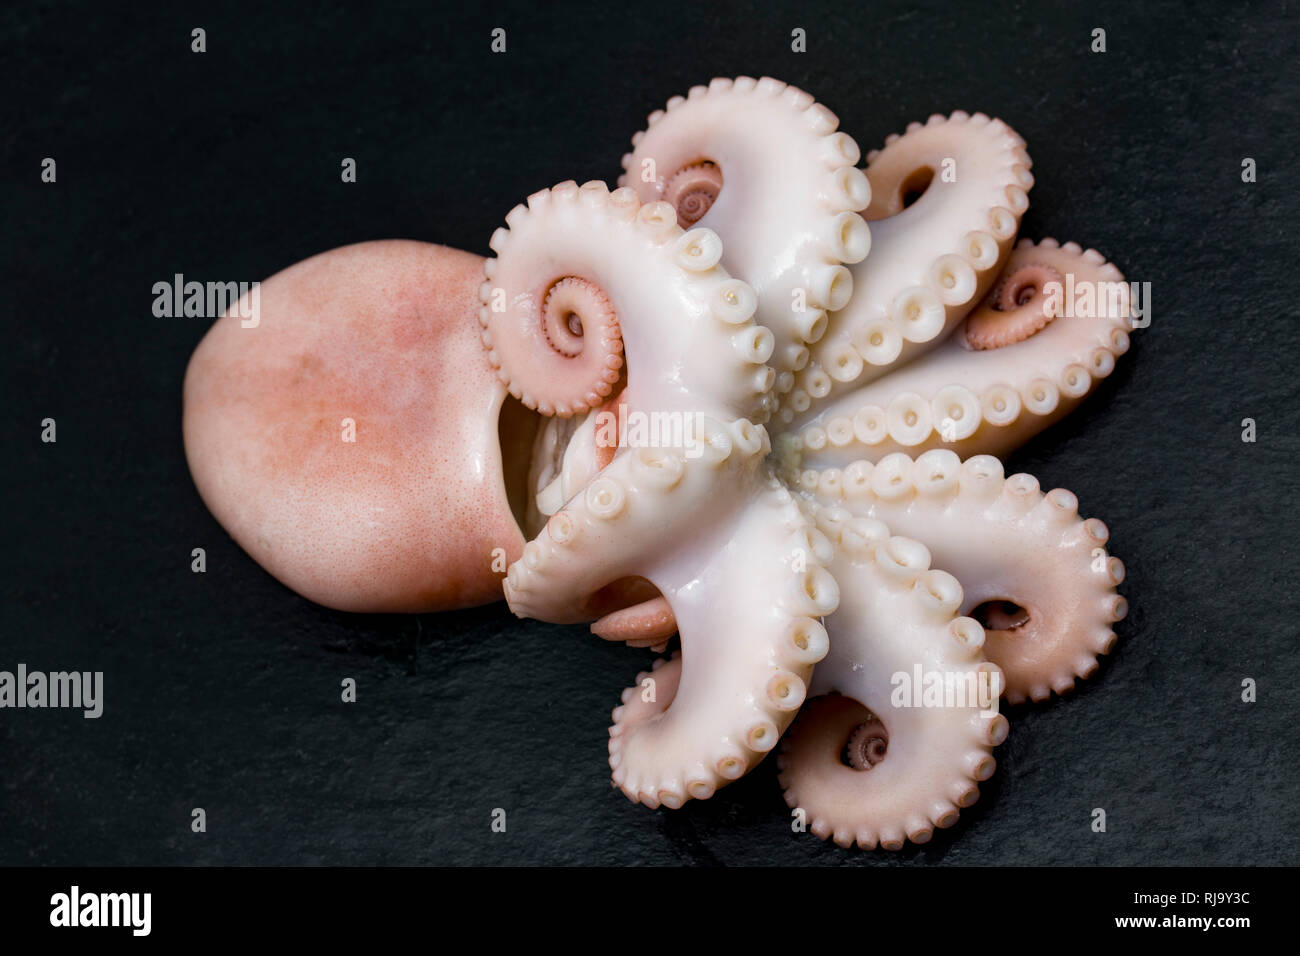 A cooked lesser, or curled octopus, Eledone cirrhosa, that has been caught commercially in UK waters and bought from a supermarket. It is pictured boi Stock Photo